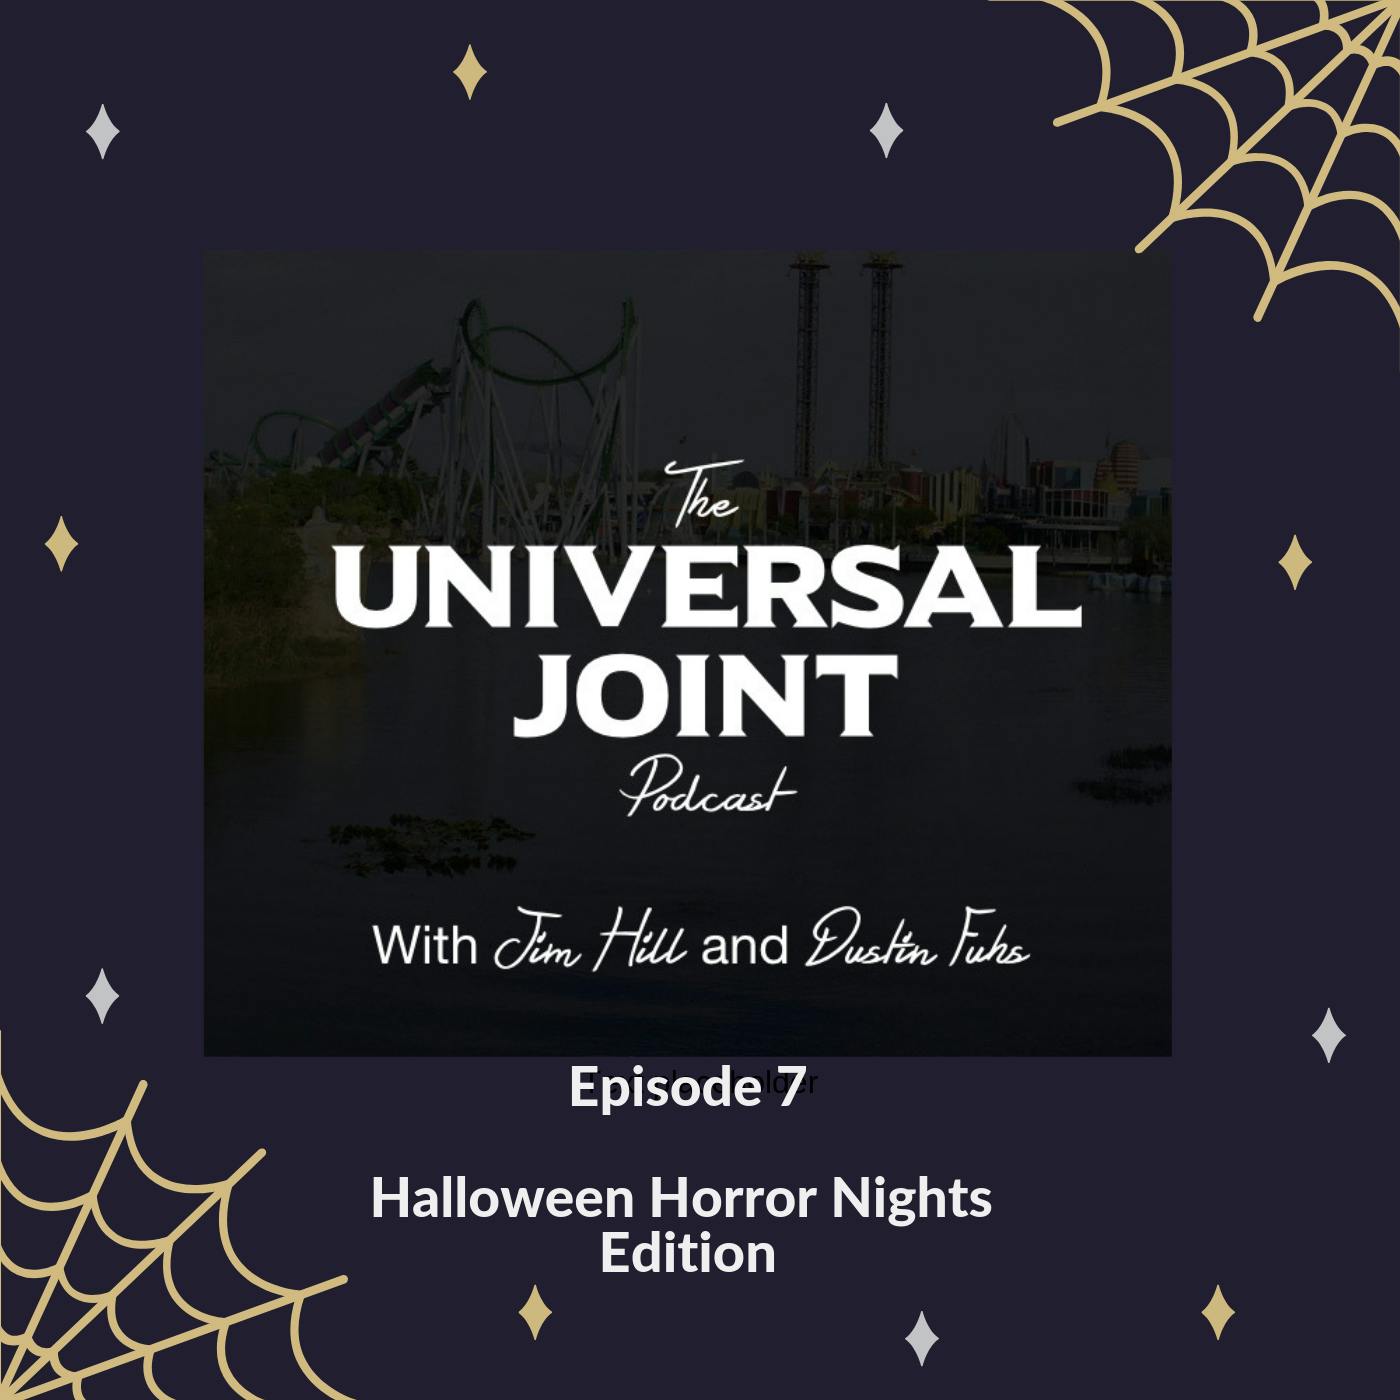 Universal Joint Episode 7:  Universal Orlando’s shifting event schedule